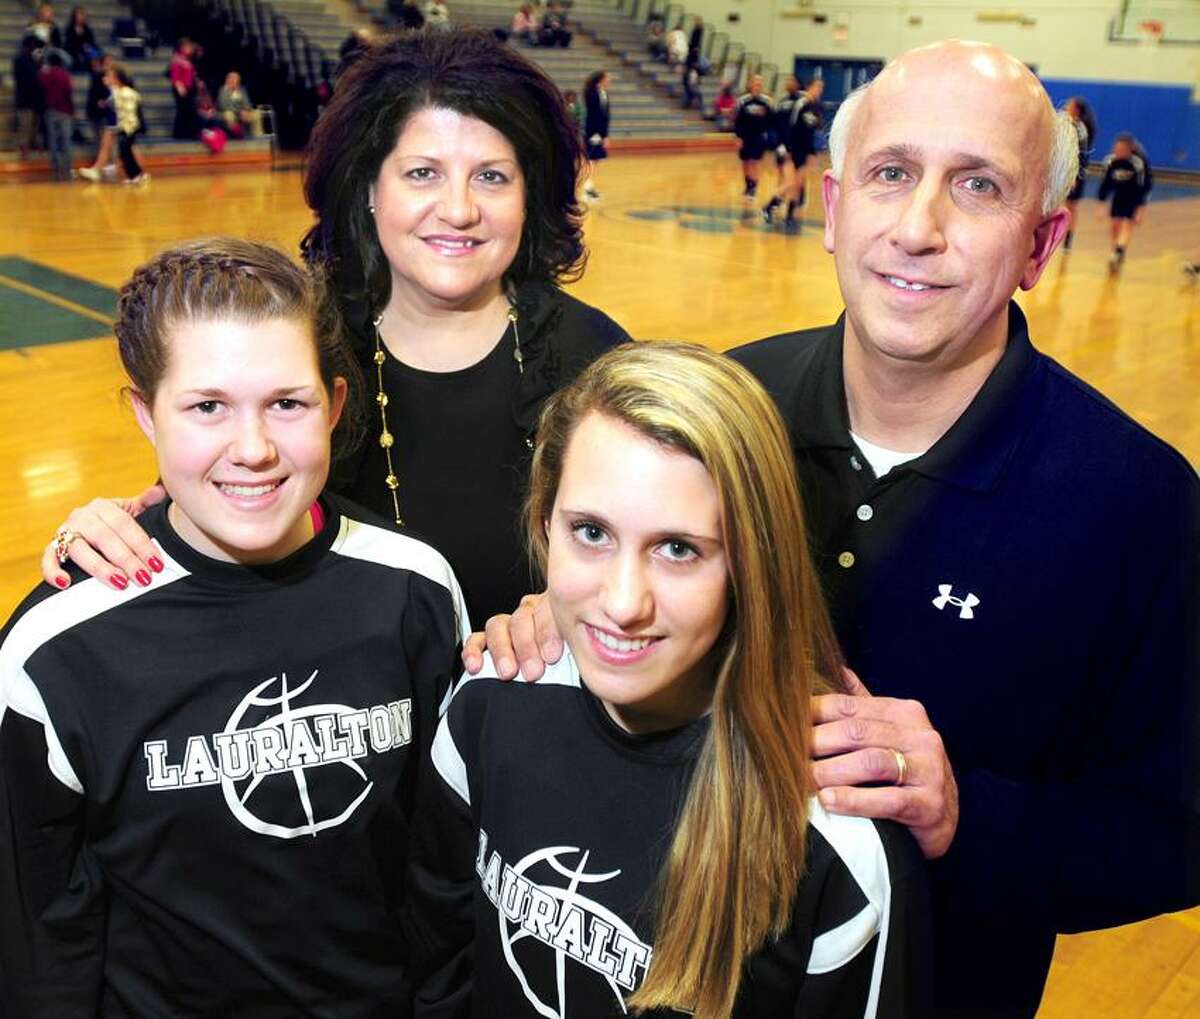 Carly Fabbri (front left) and Michelle DeSantis (front right) of Lauralton Hall are photographed with their parents Tricia Fabbri (back left) and Joe DeSantis (back right0 before a game at Bunnell in Stratford on 1/10/2012.Photo by Arnold Gold/New Haven Register AG0434E